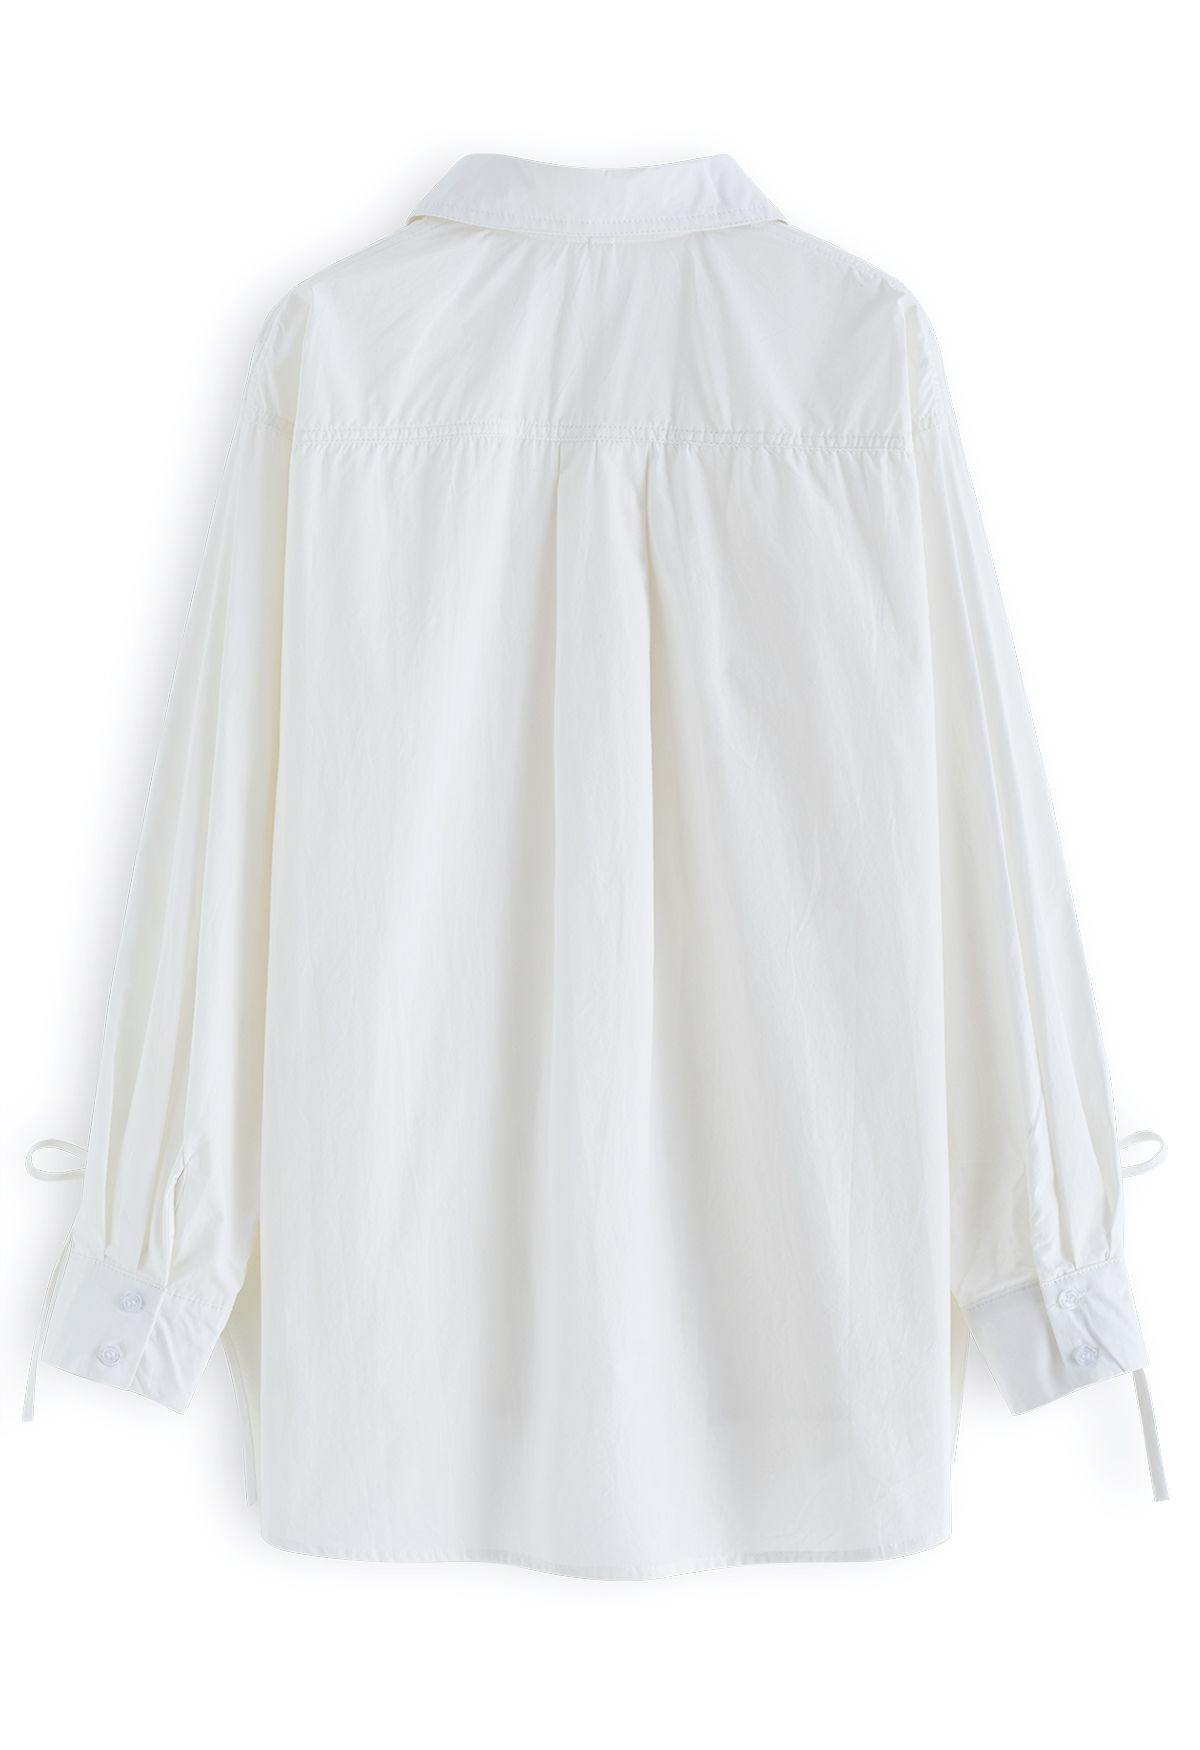 Drawstring Sleeves Button Down Cotton Shirt in White